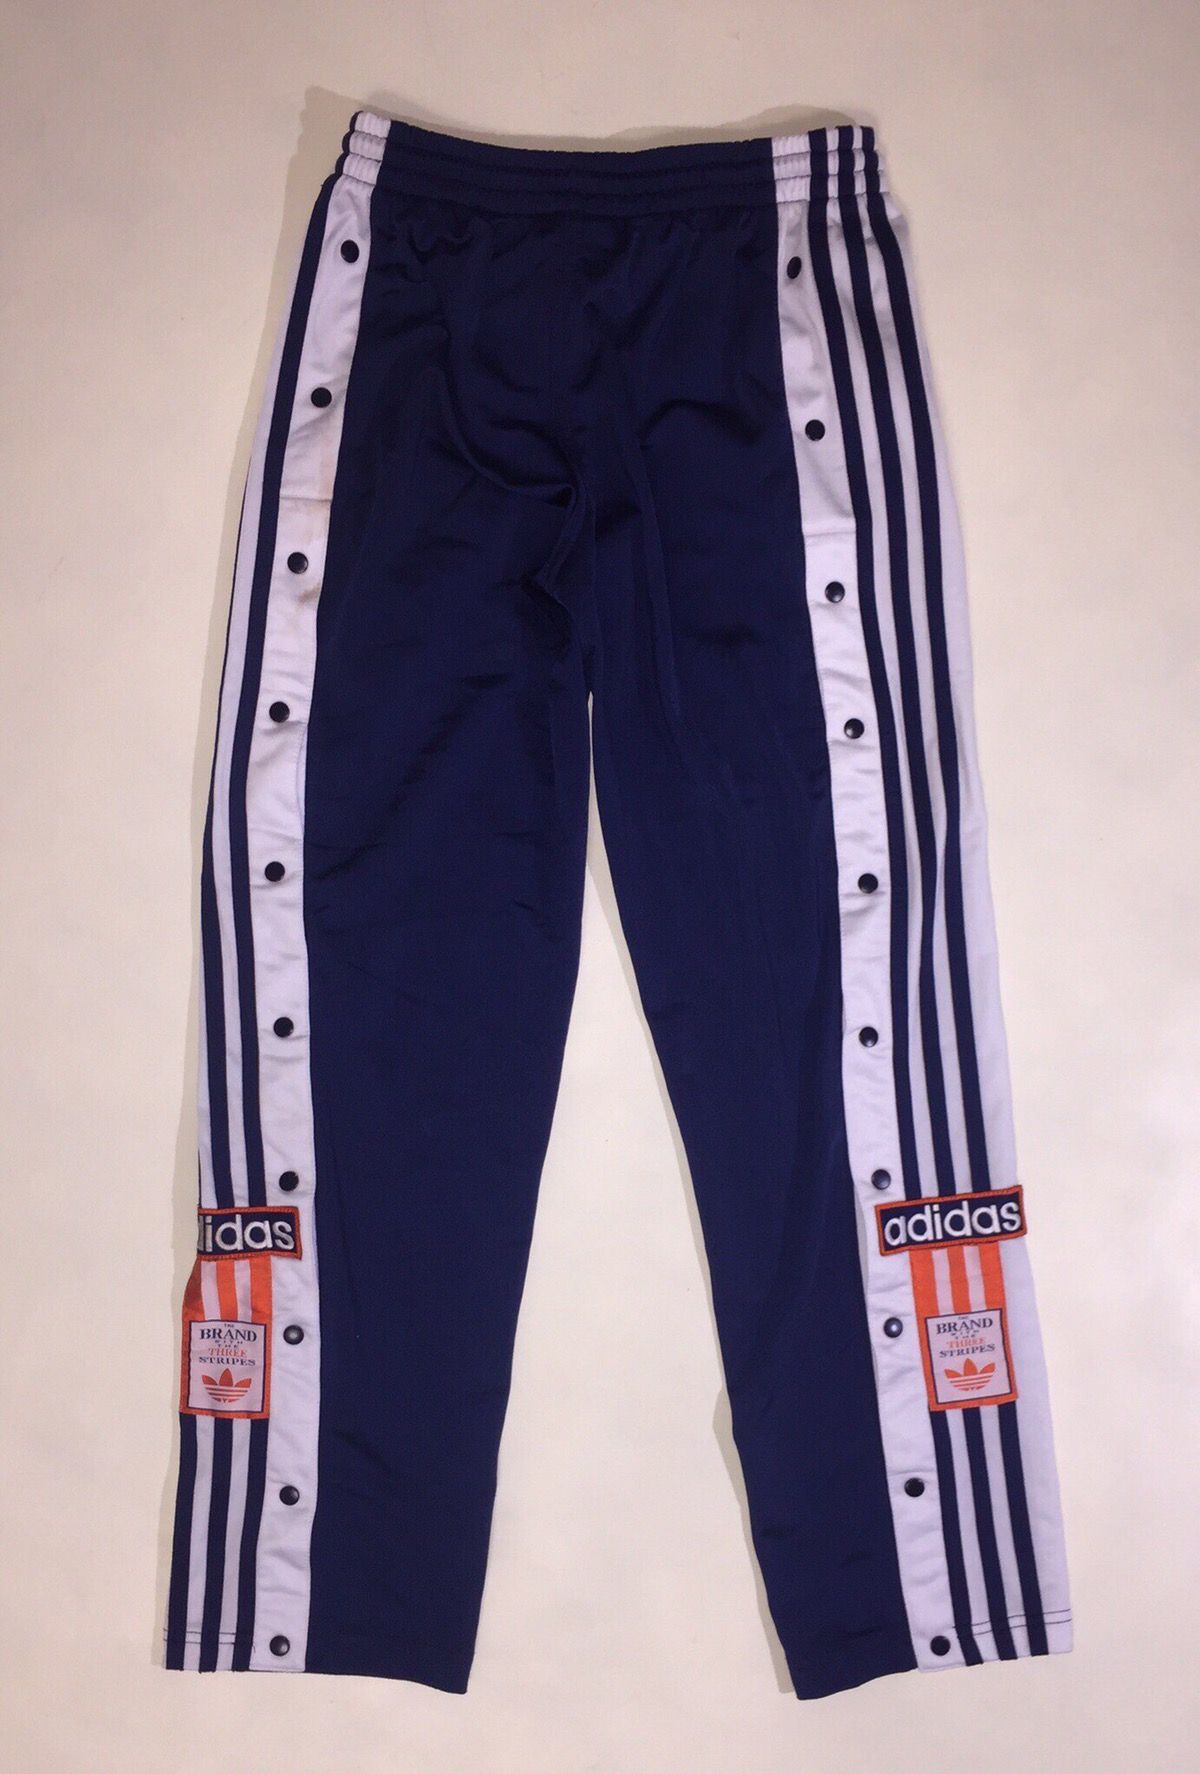 Adidas Adidas Poppers Vintage 90s Track Pants | Grailed